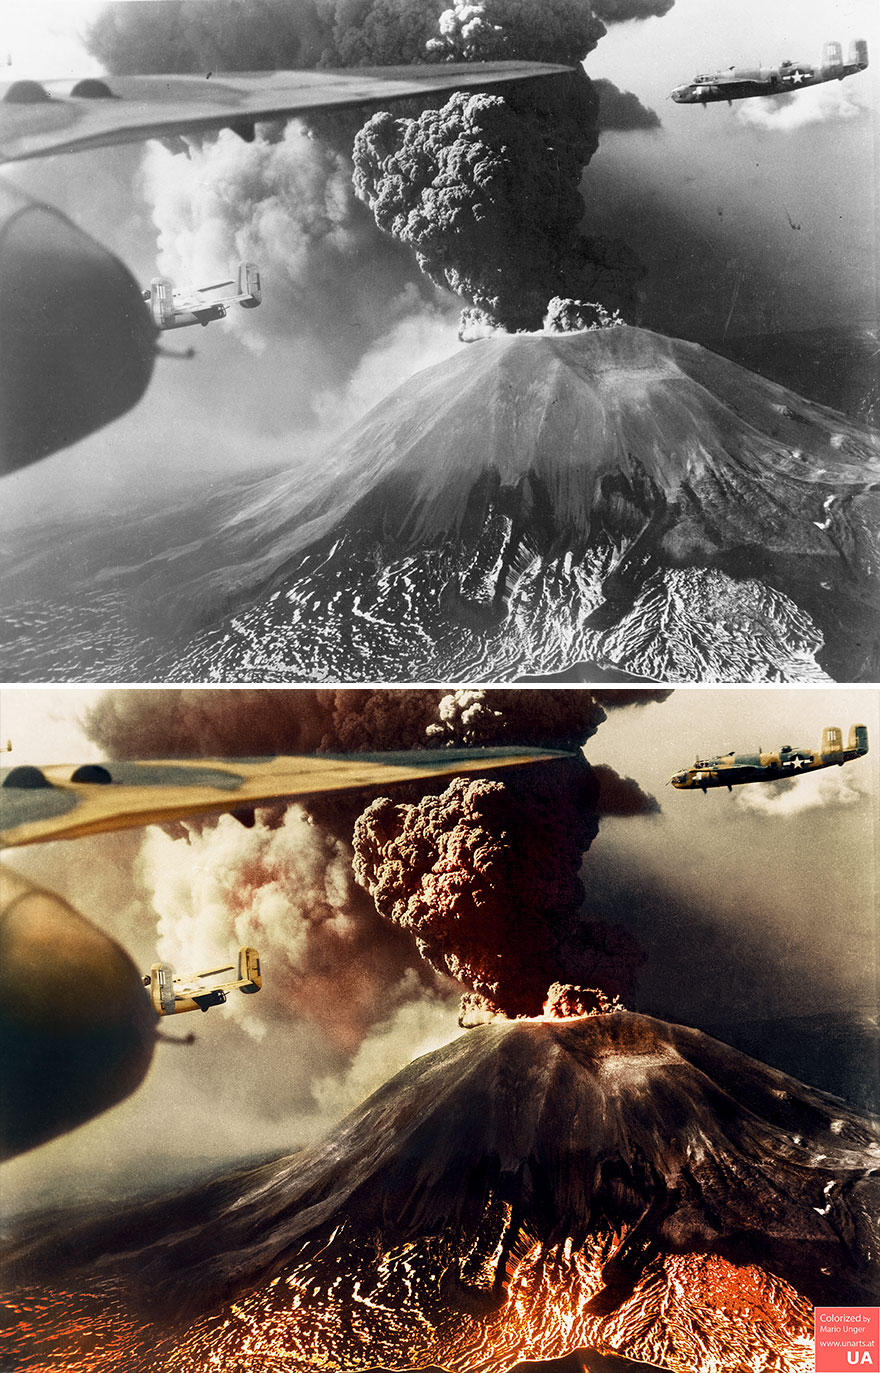 North American B-25s Flies Past Mount Vesuvius Which Erupted On The 18th March 1944, Destroying The Village San Sebastiano & San Giorge, Killing 57